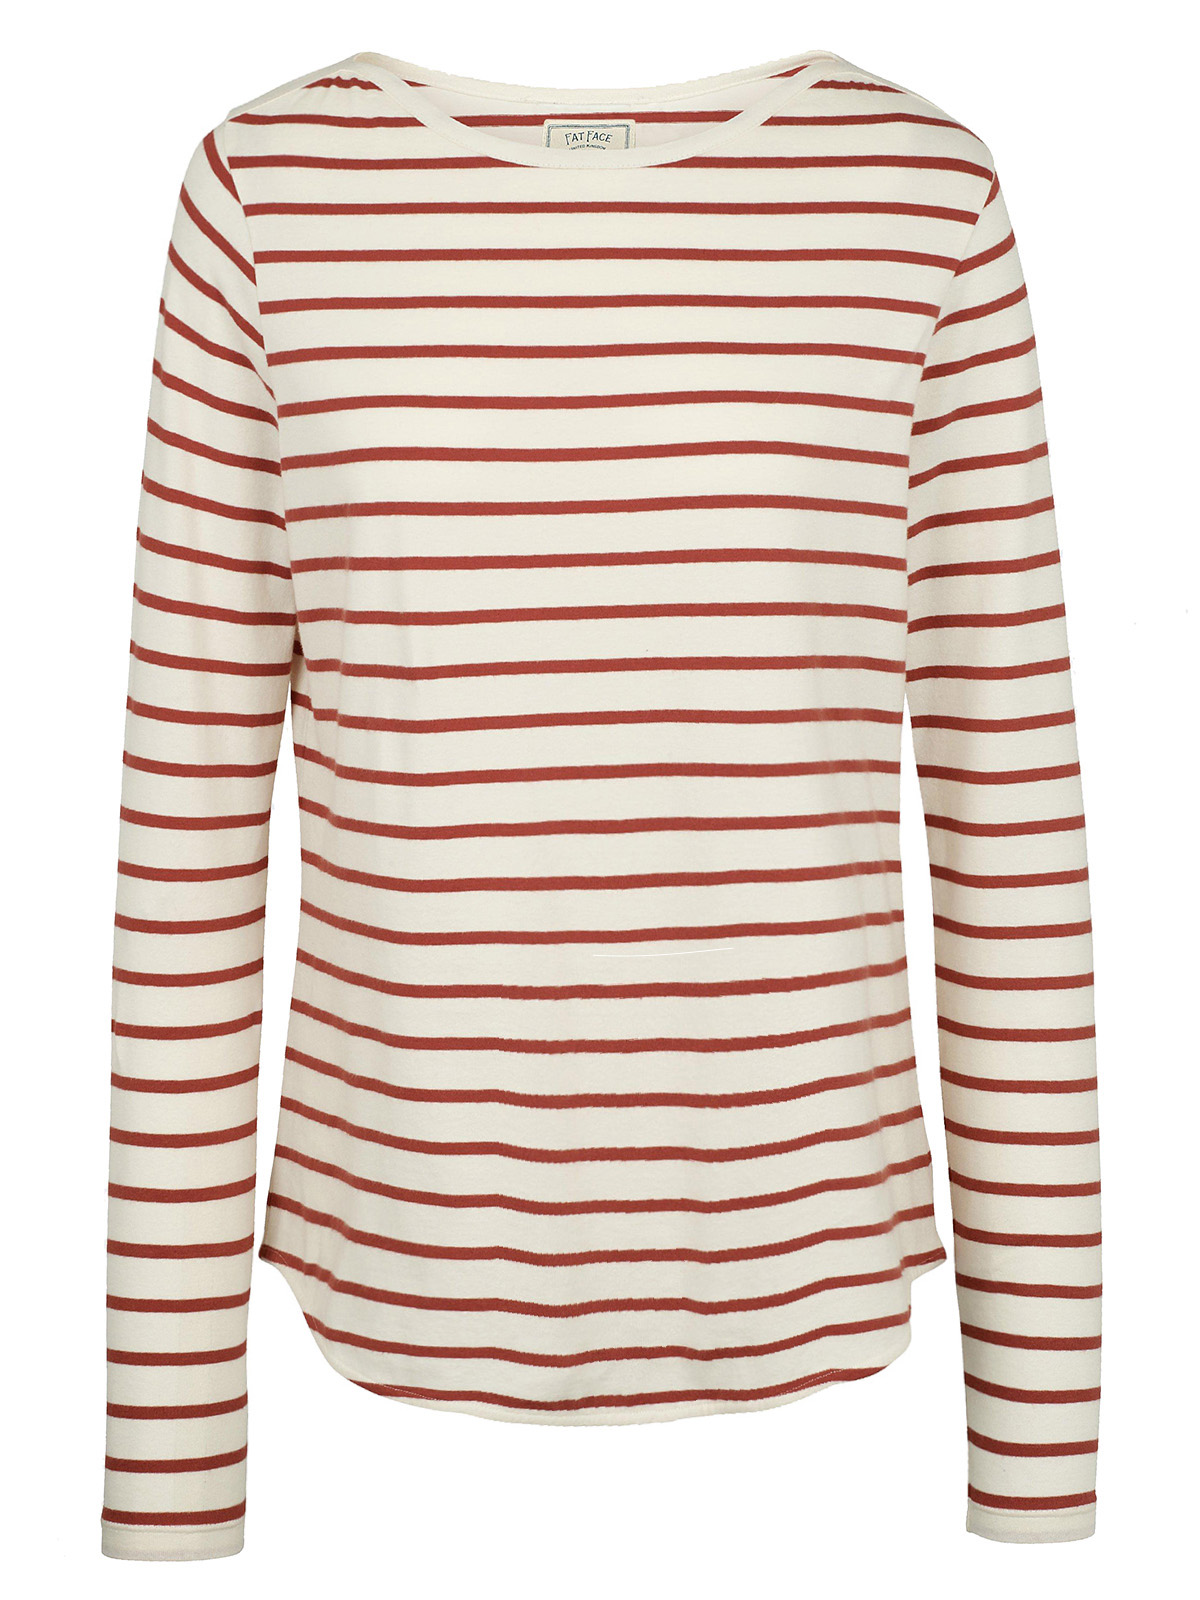 FAT FACE - - Fat Face RED Long Sleeve Breton Stripe T-Shirt - Size 10 to 18